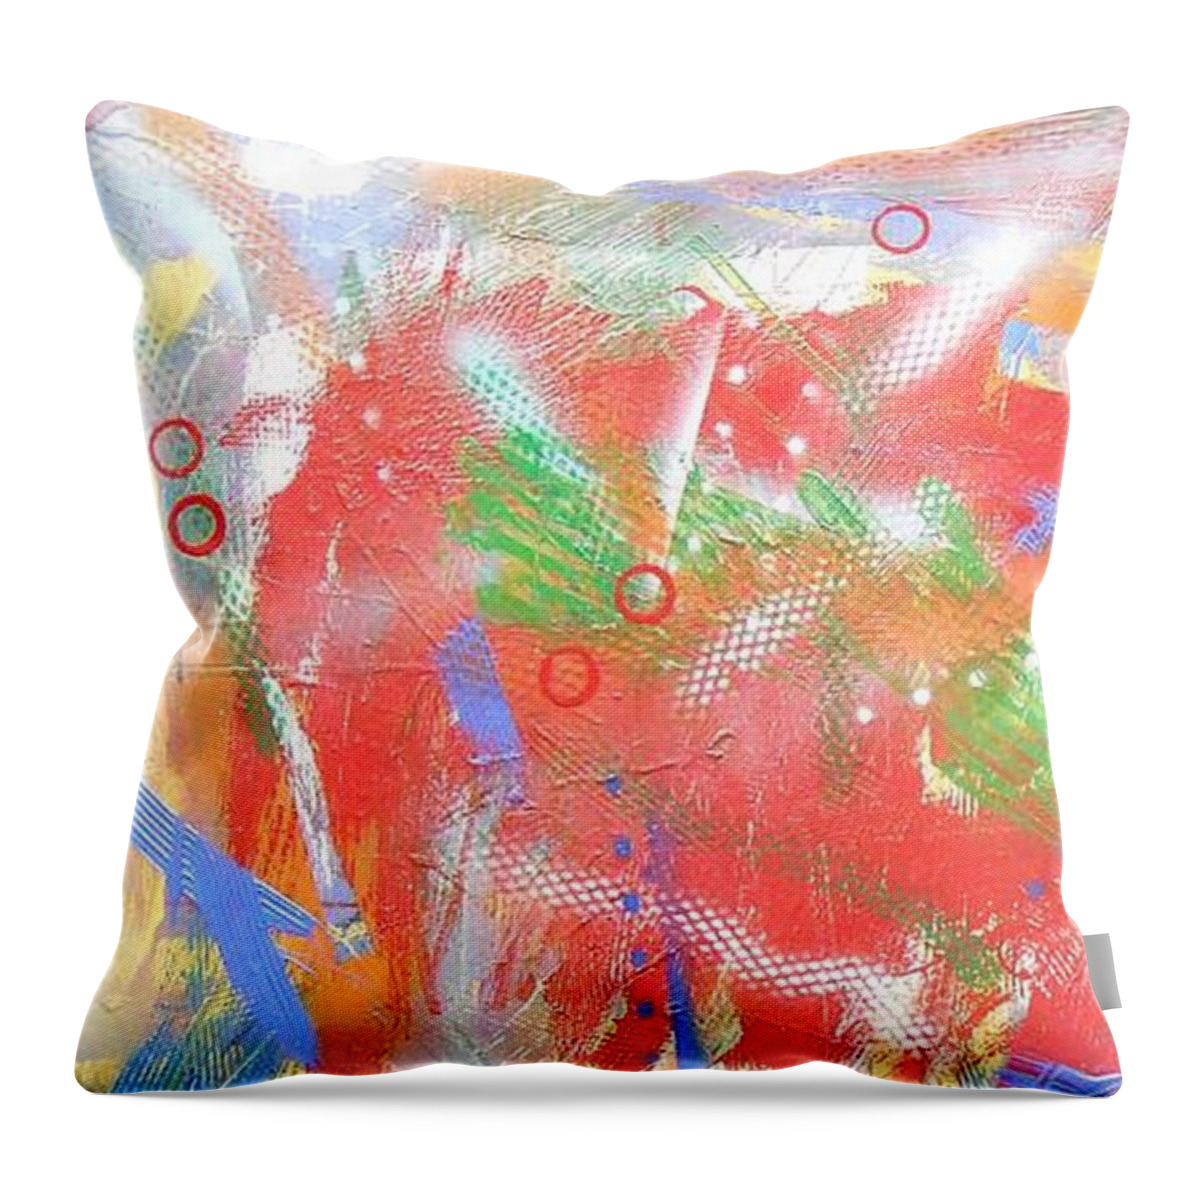 Abstract Throw Pillow featuring the painting Borderline by GH FiLben